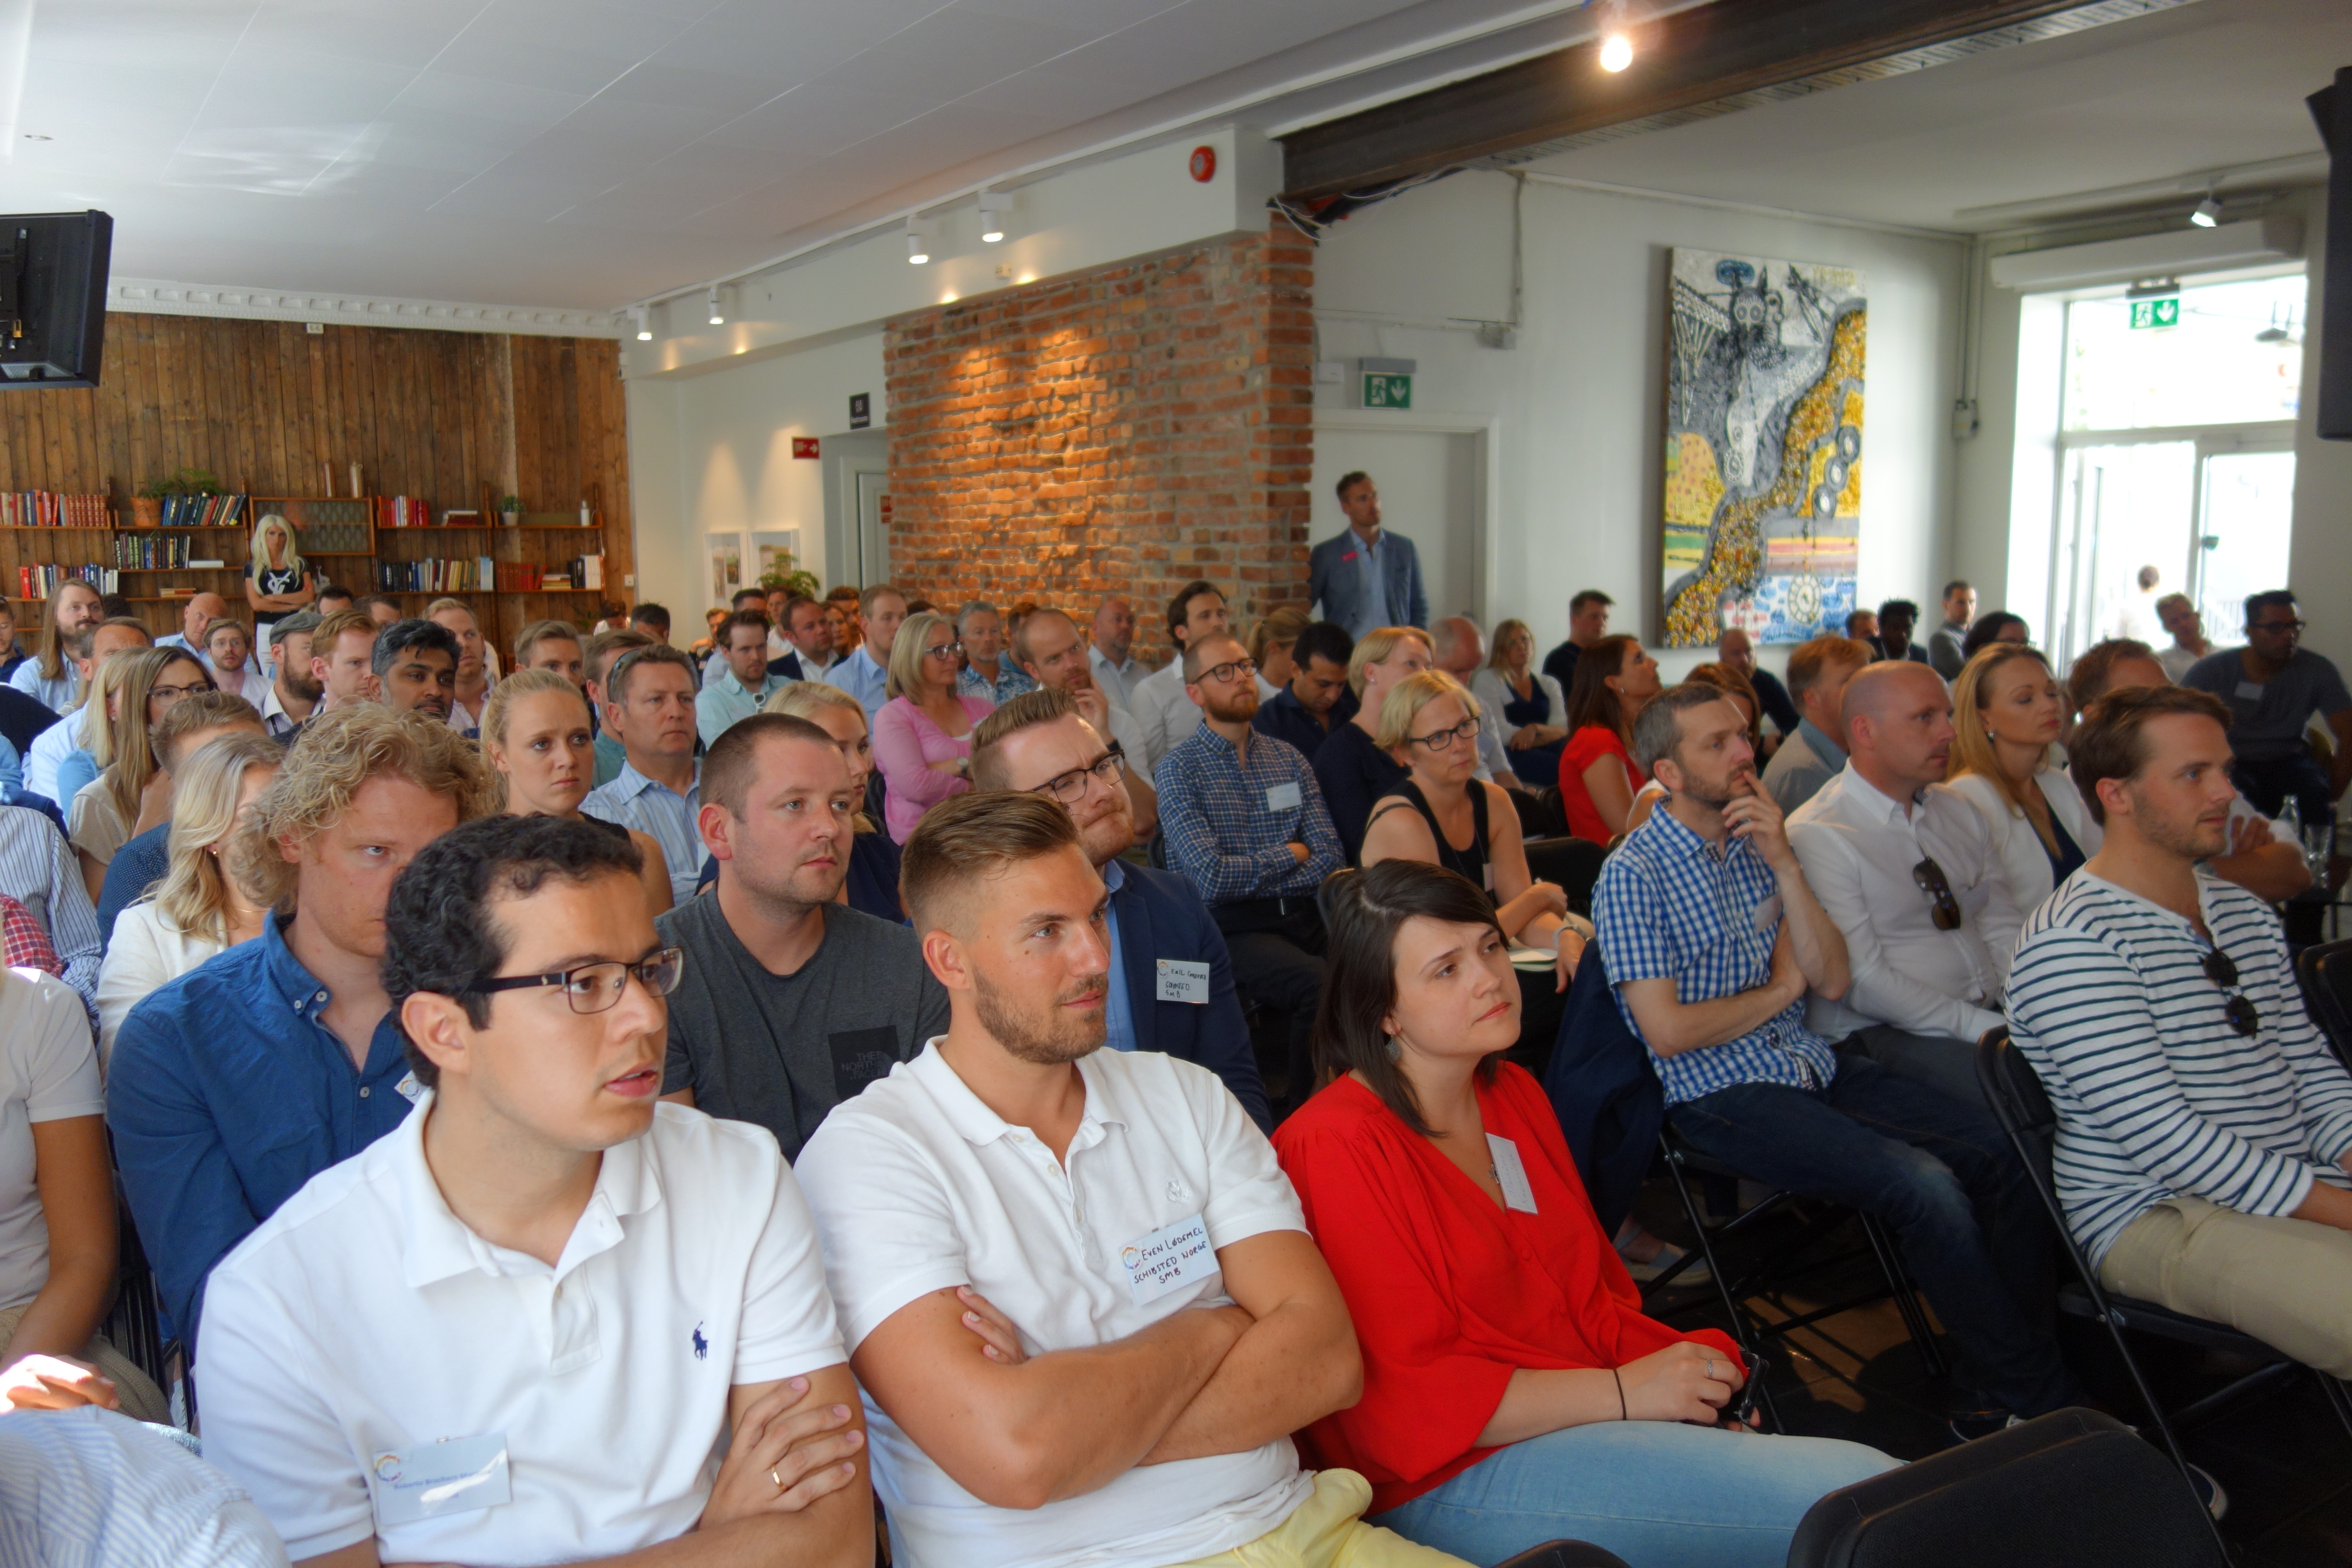 C2 Recap - Lessons and Highlights from Our Conference on Company Culture